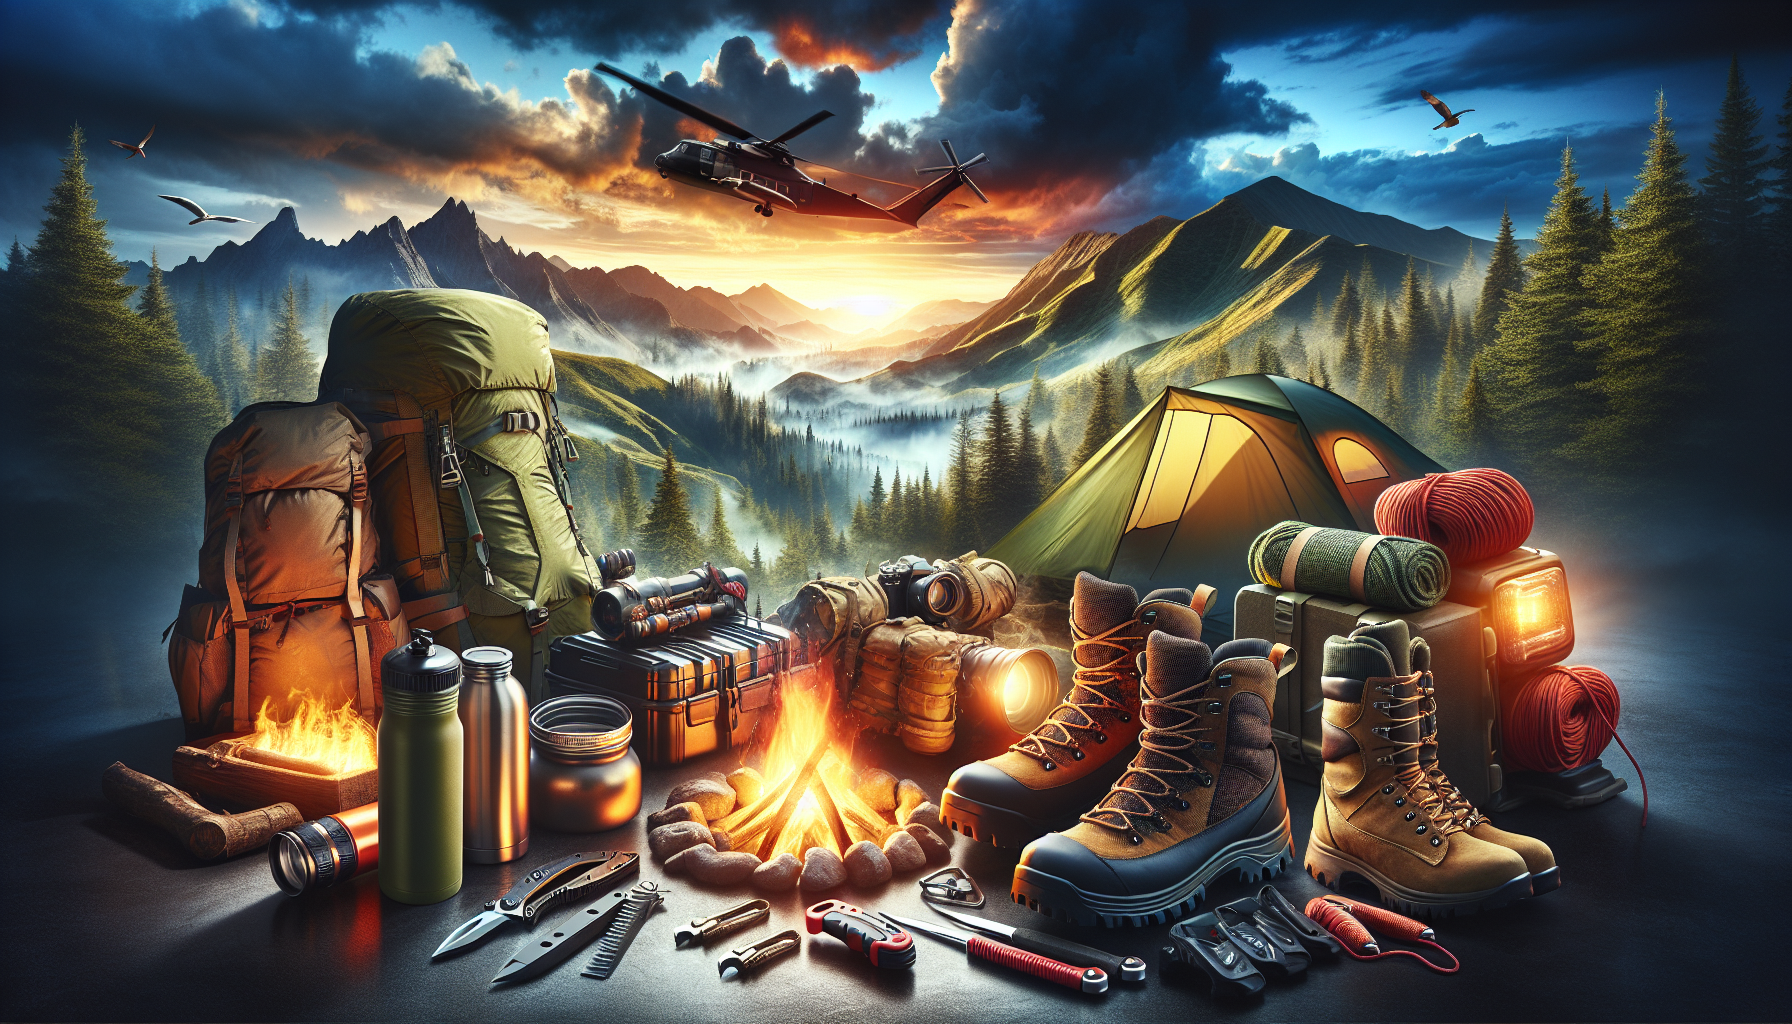 Outdoor Survival Gear: A Guide For Camping In The Wilderness